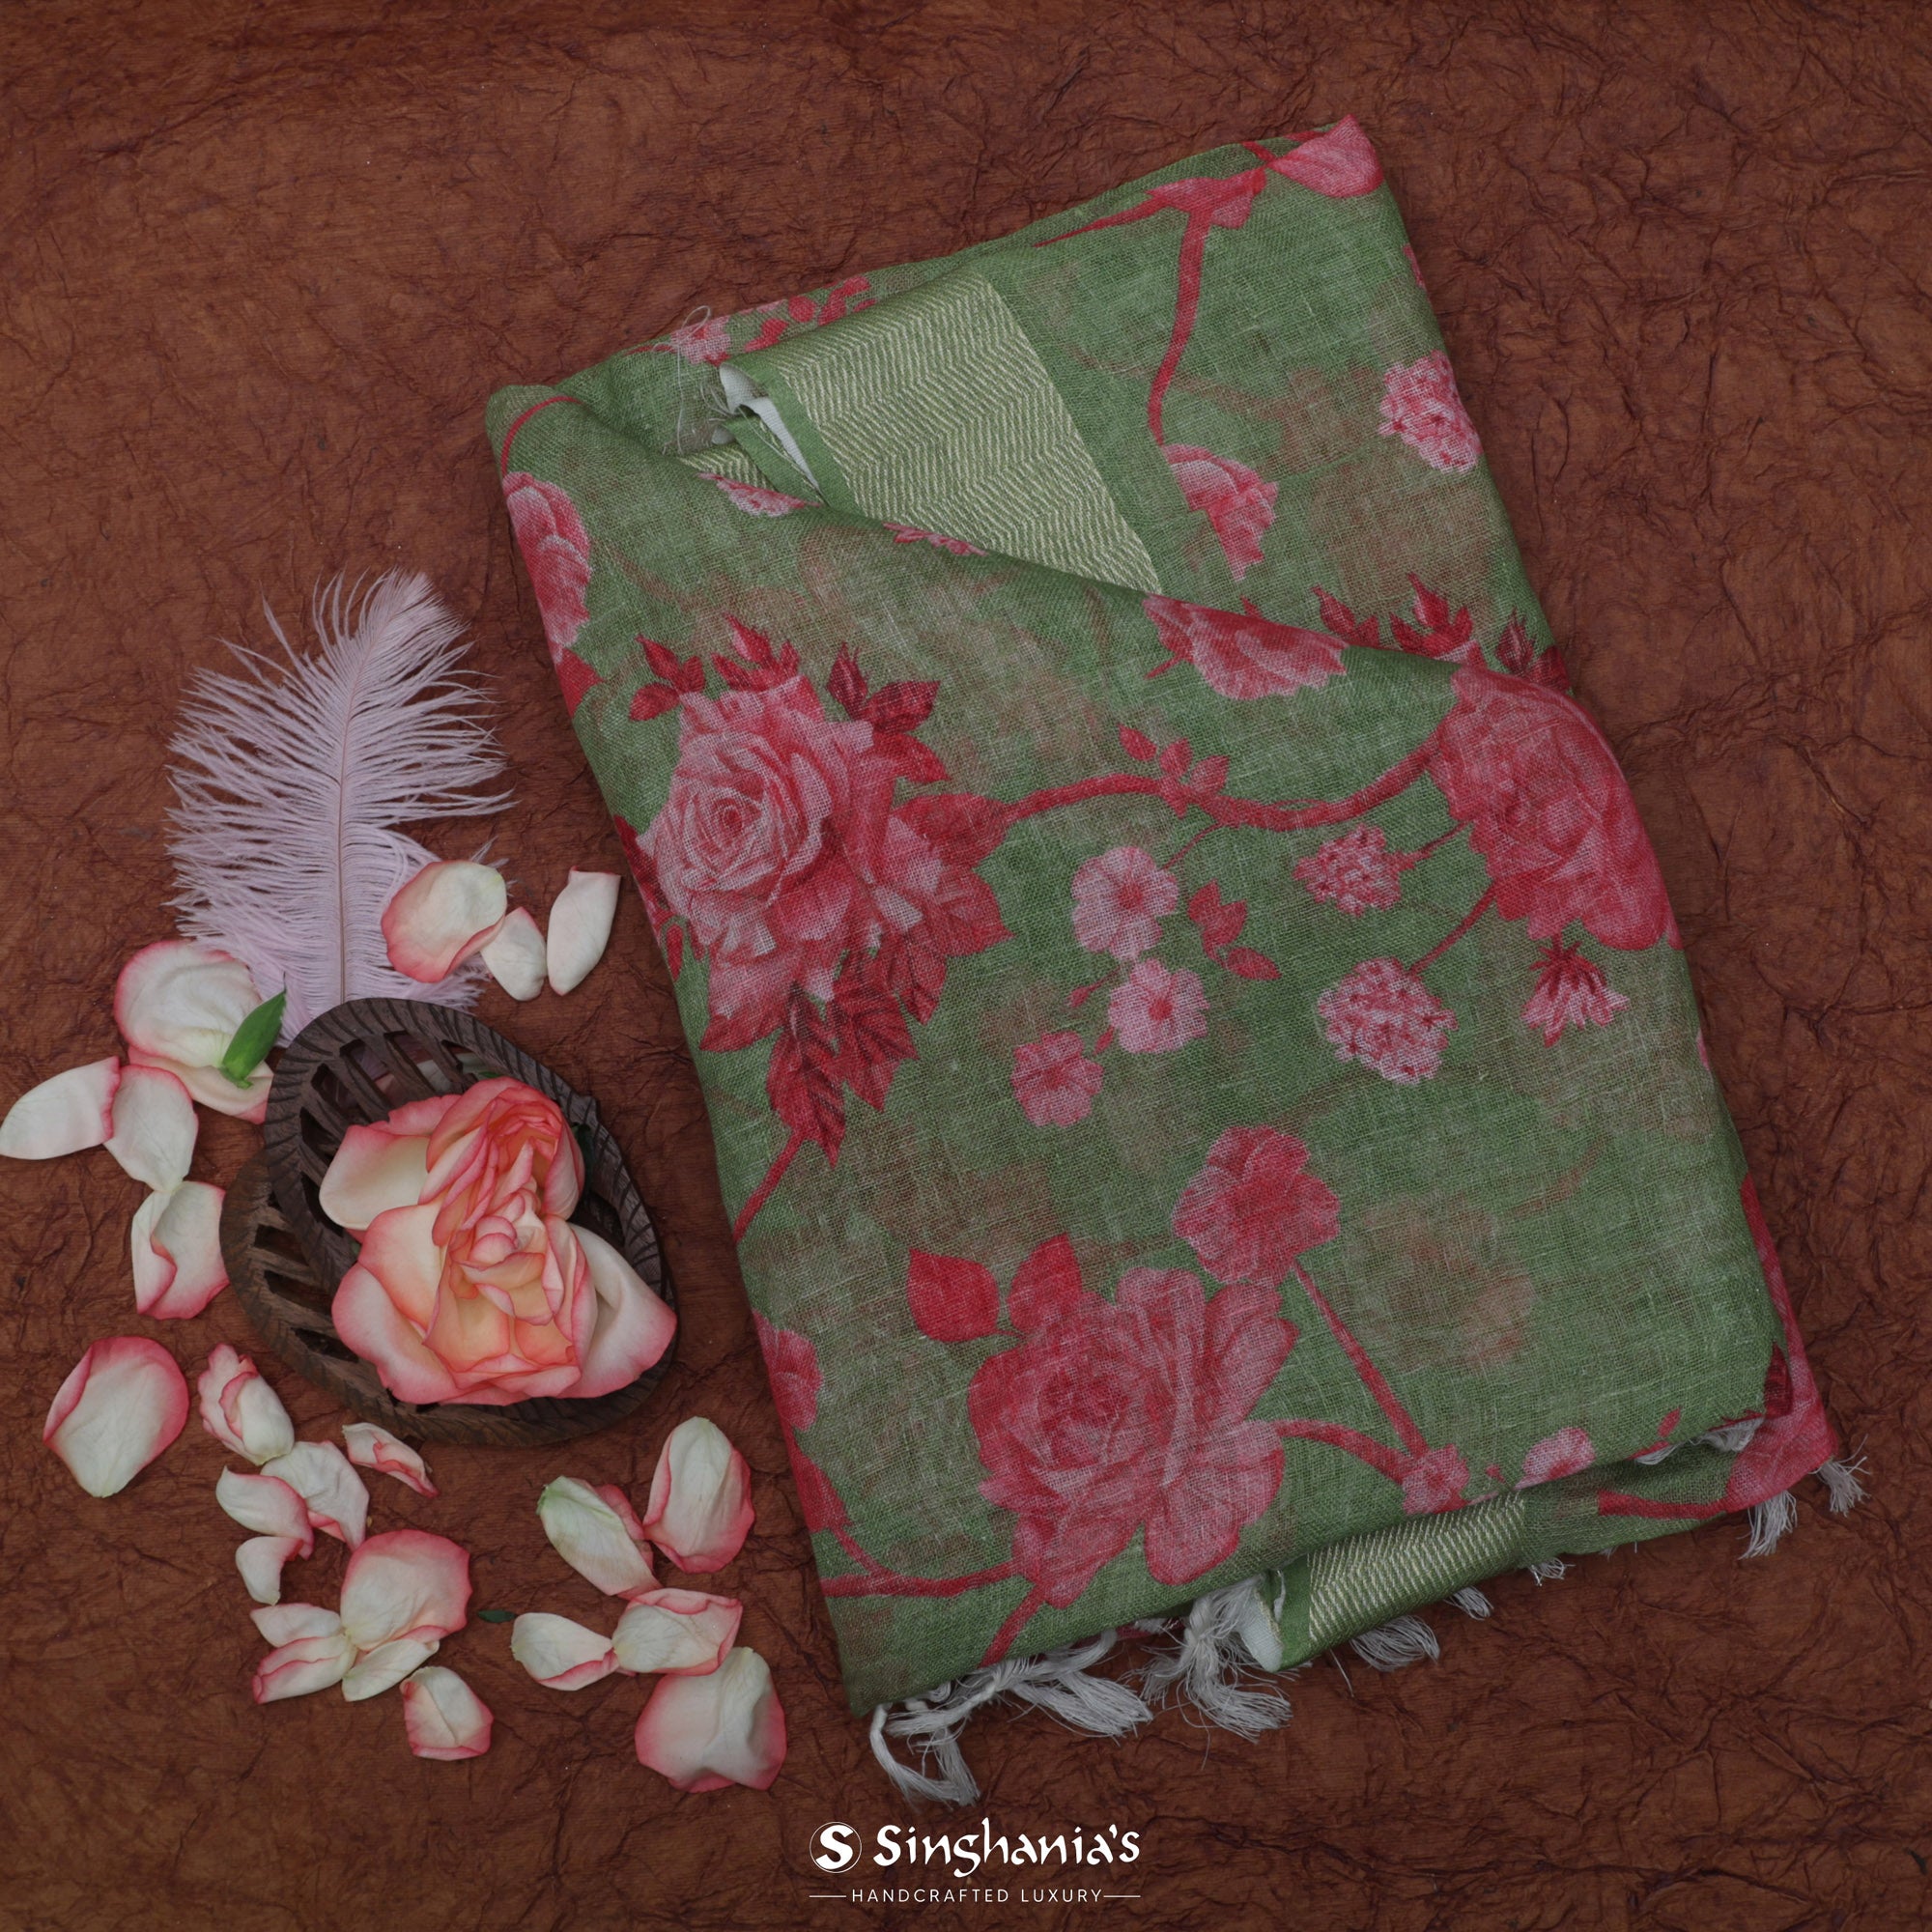 Dark Sea Green Printed Linen Saree With Floral Jaal Pattern